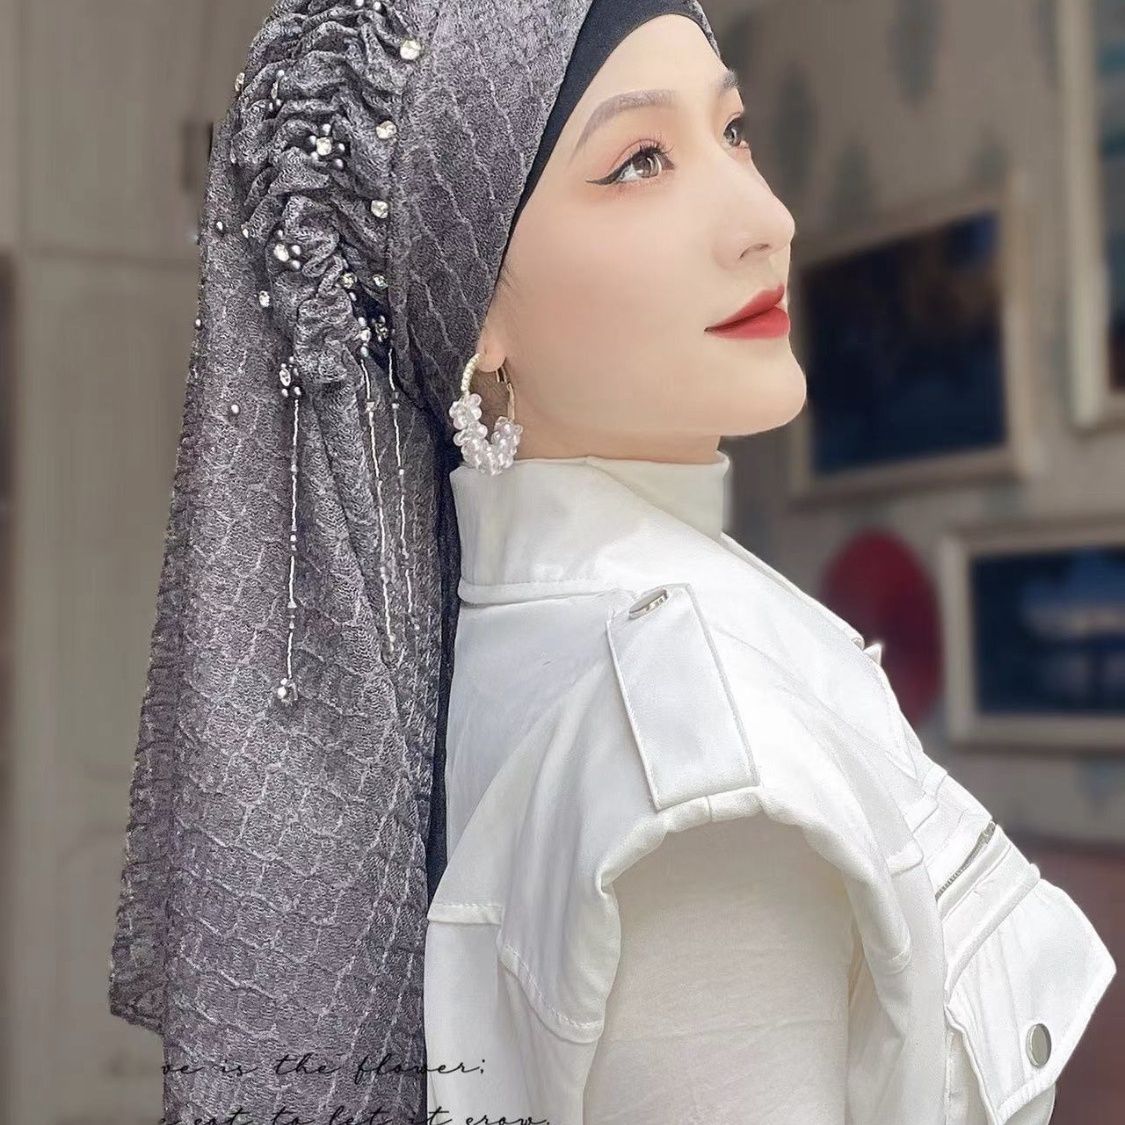 [Gauze scarf natural color cap]  Muslim scarf women's hot style heavy industry pleated tassel triangle scarf